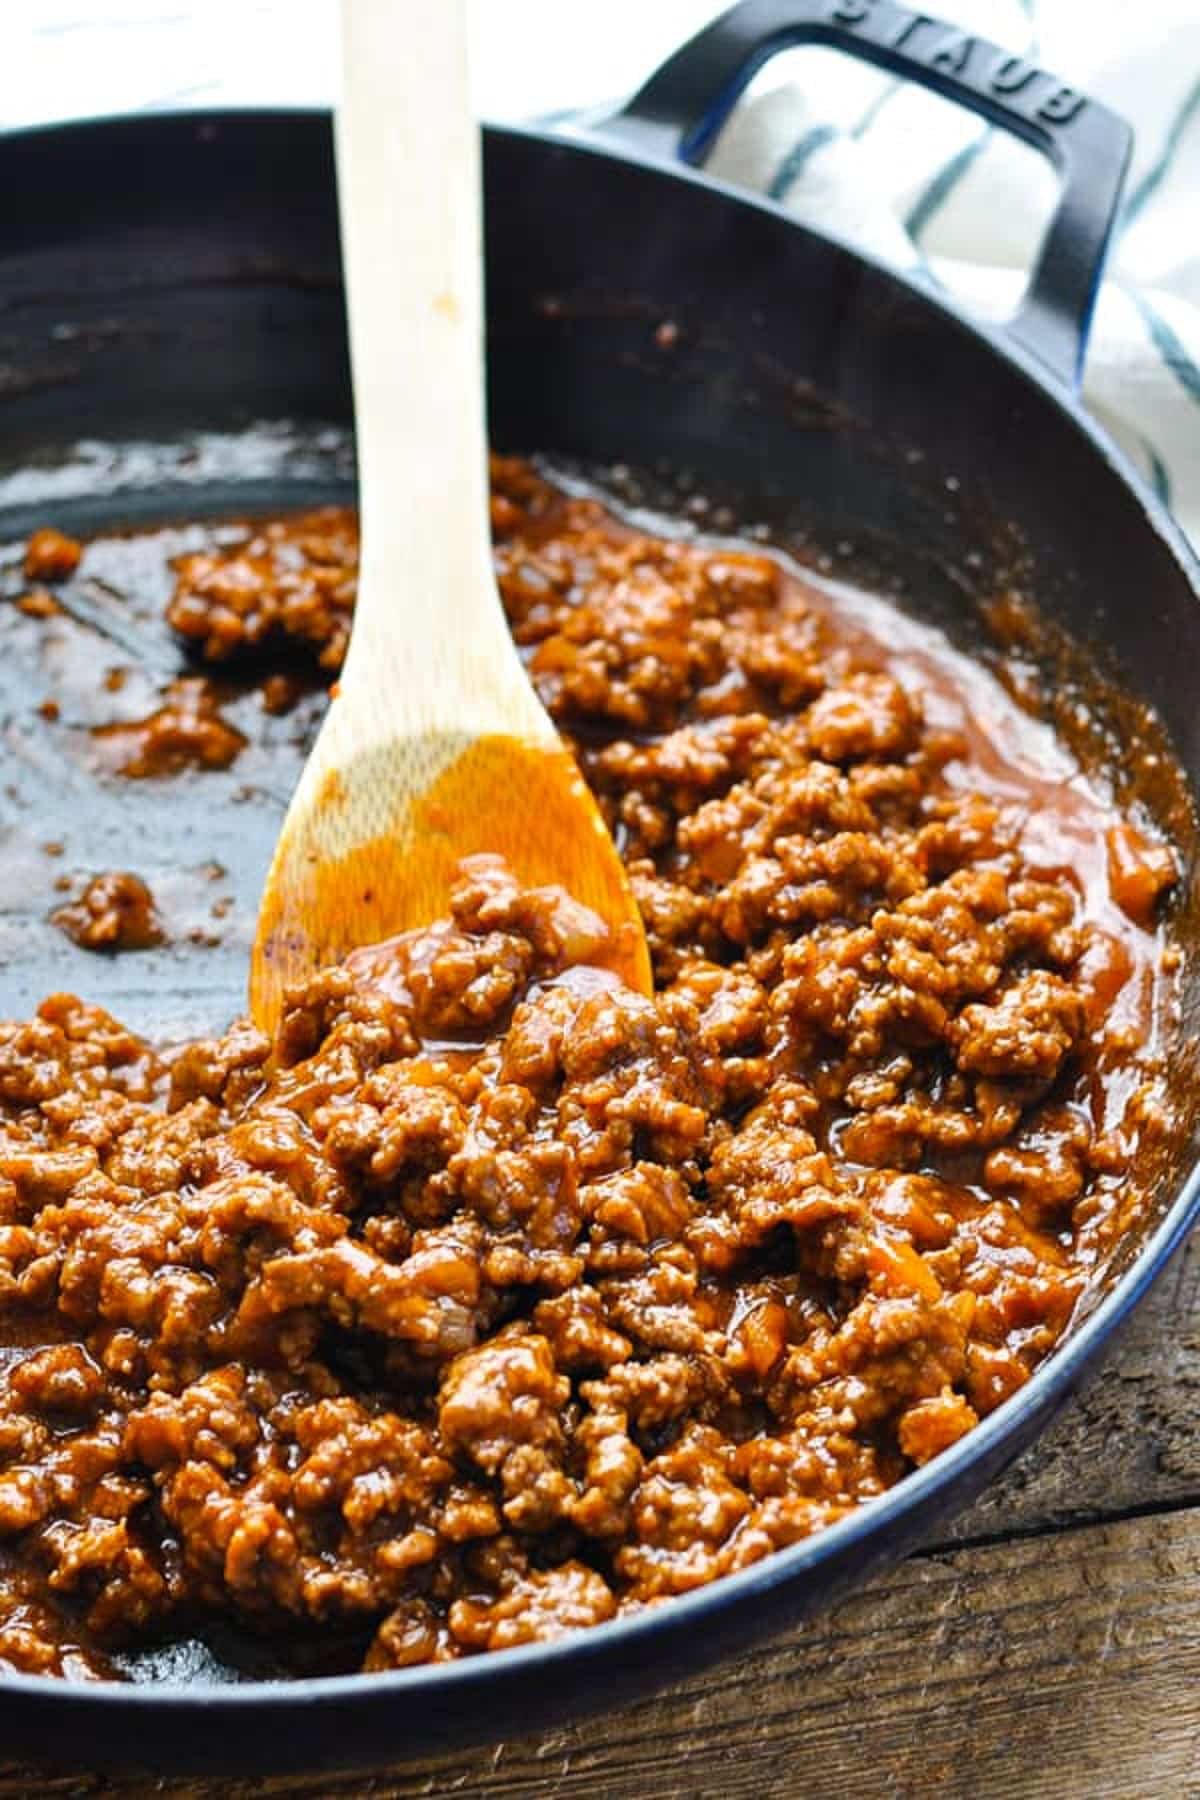 Wooden spoon in a skillet of the best homemade sloppy joes recipe.